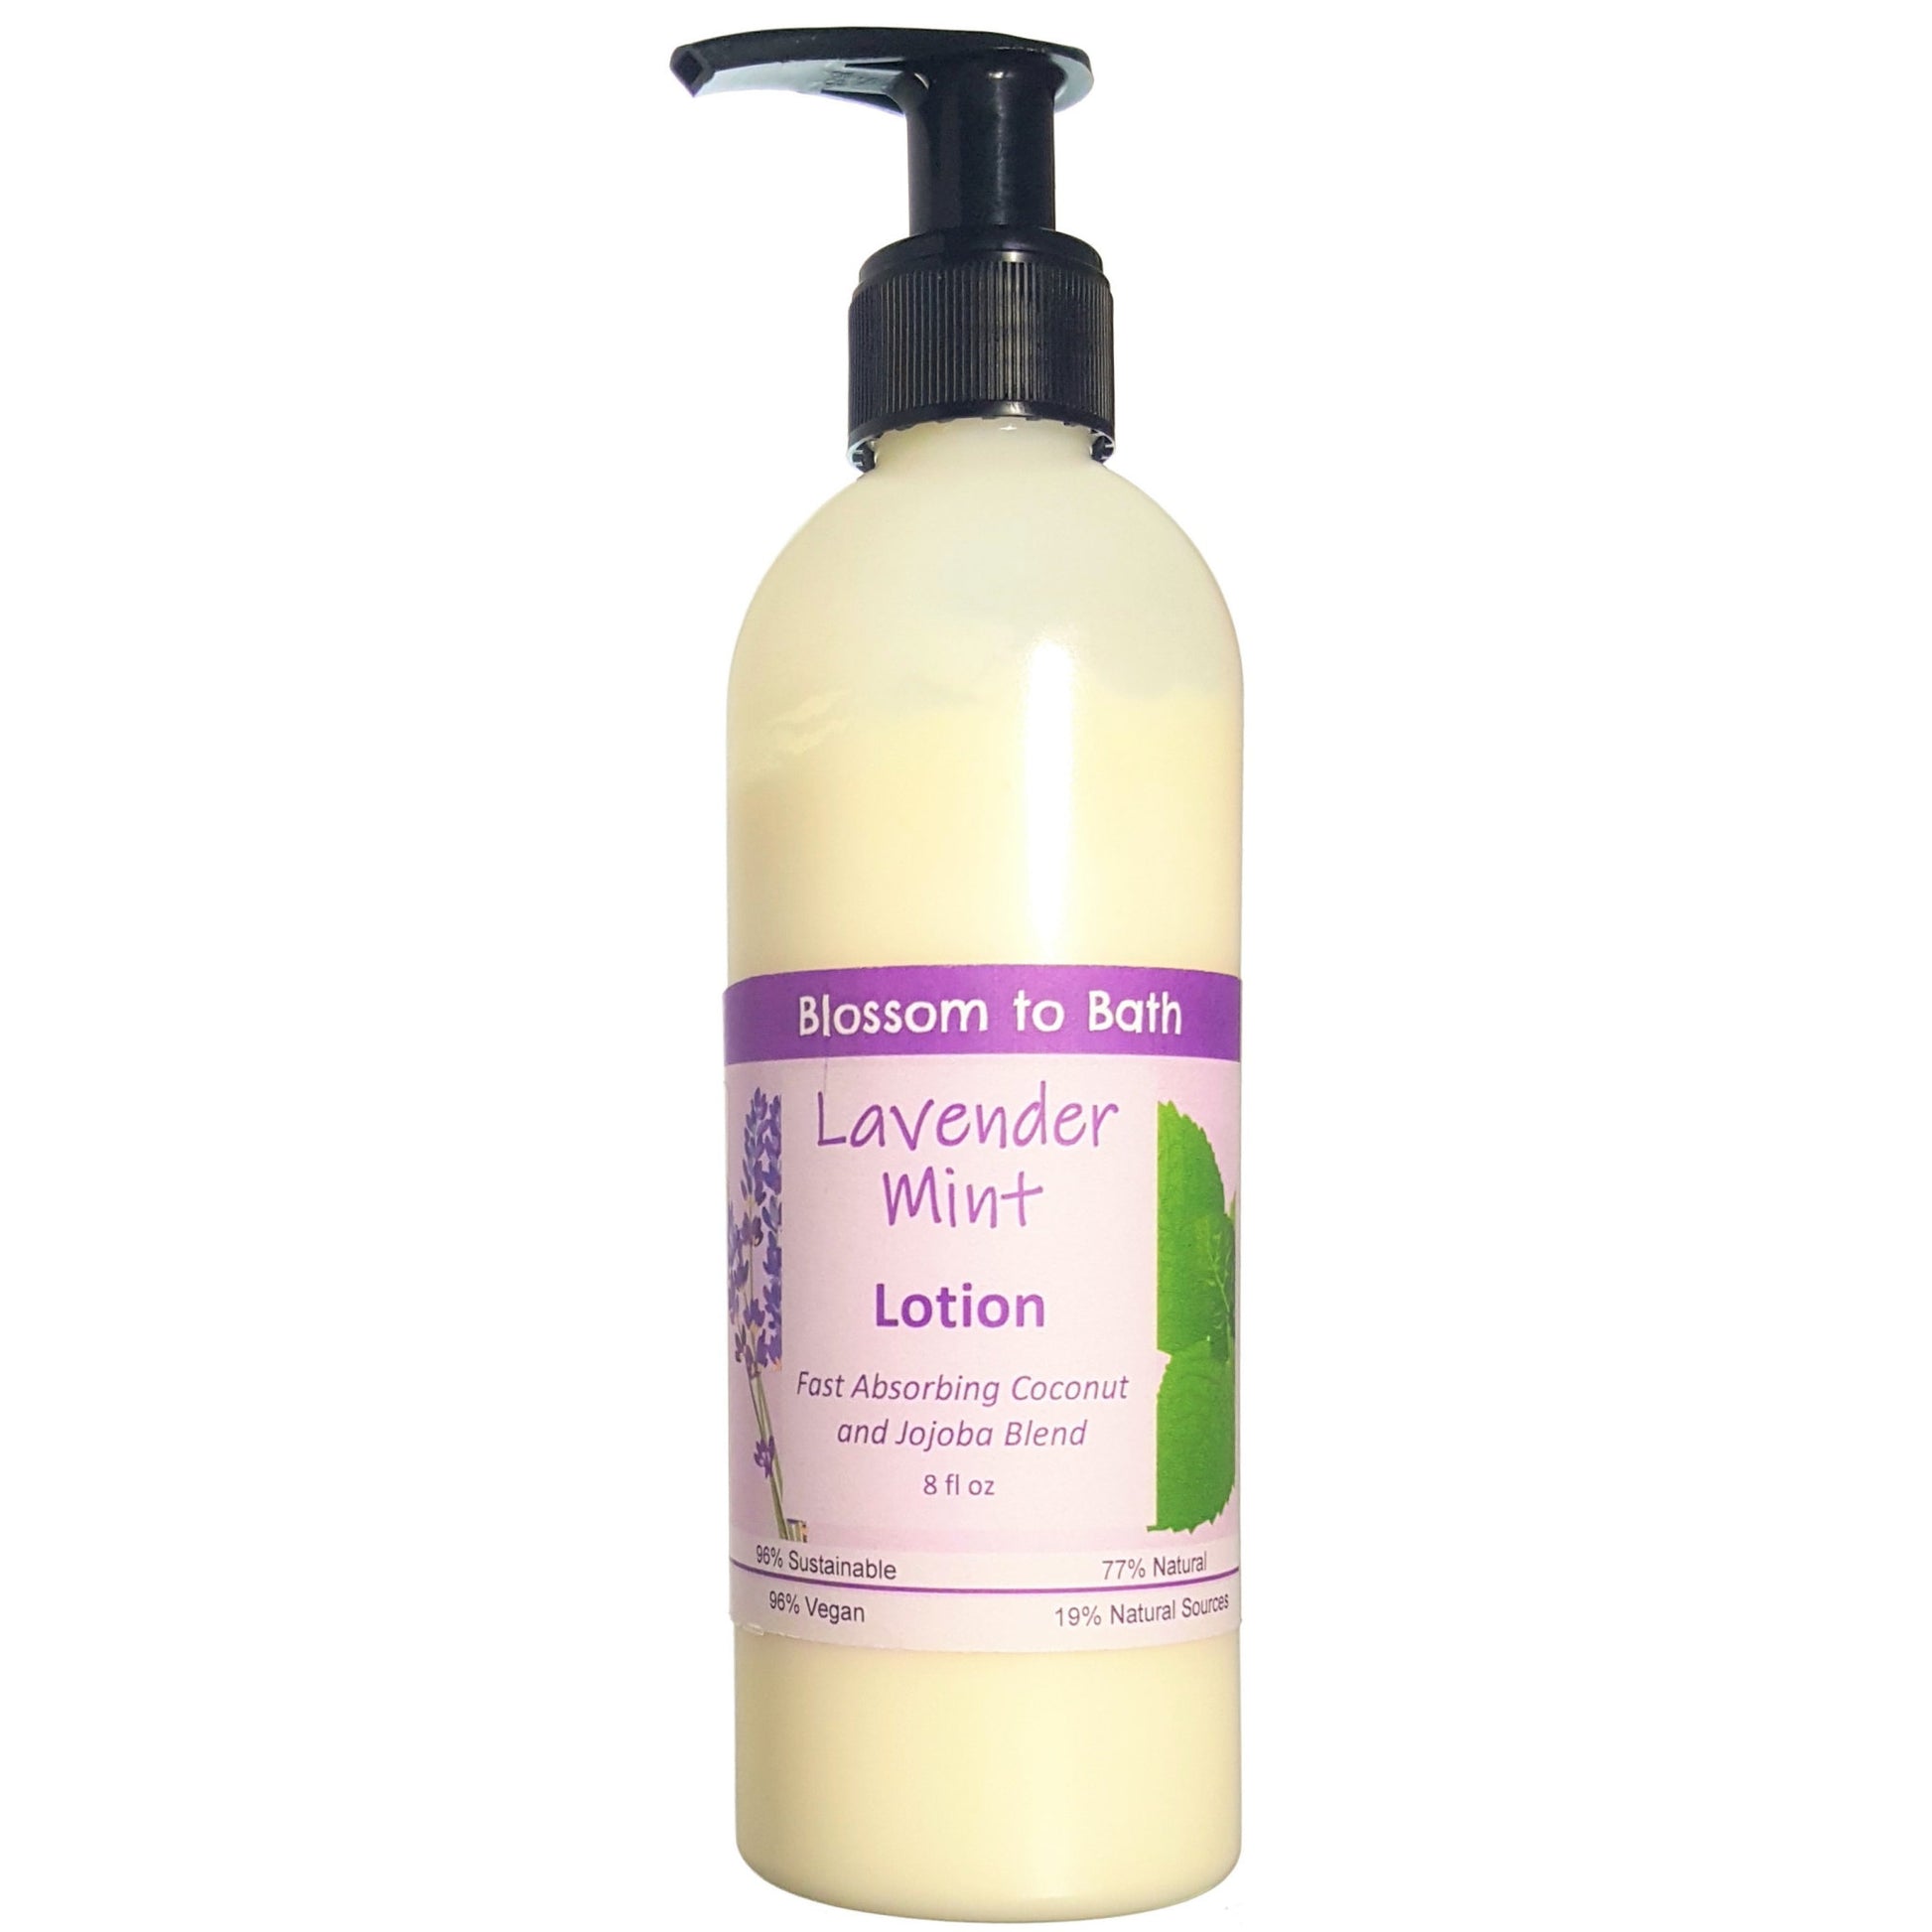 Buy Blossom to Bath Lavender Mint Lotion from Flowersong Soap Studio.  Daily moisture luxury that soaks in quickly made with organic oils and butters that soften and smooth the skin  A cheerfully relaxing combination of lavender and peppermint.